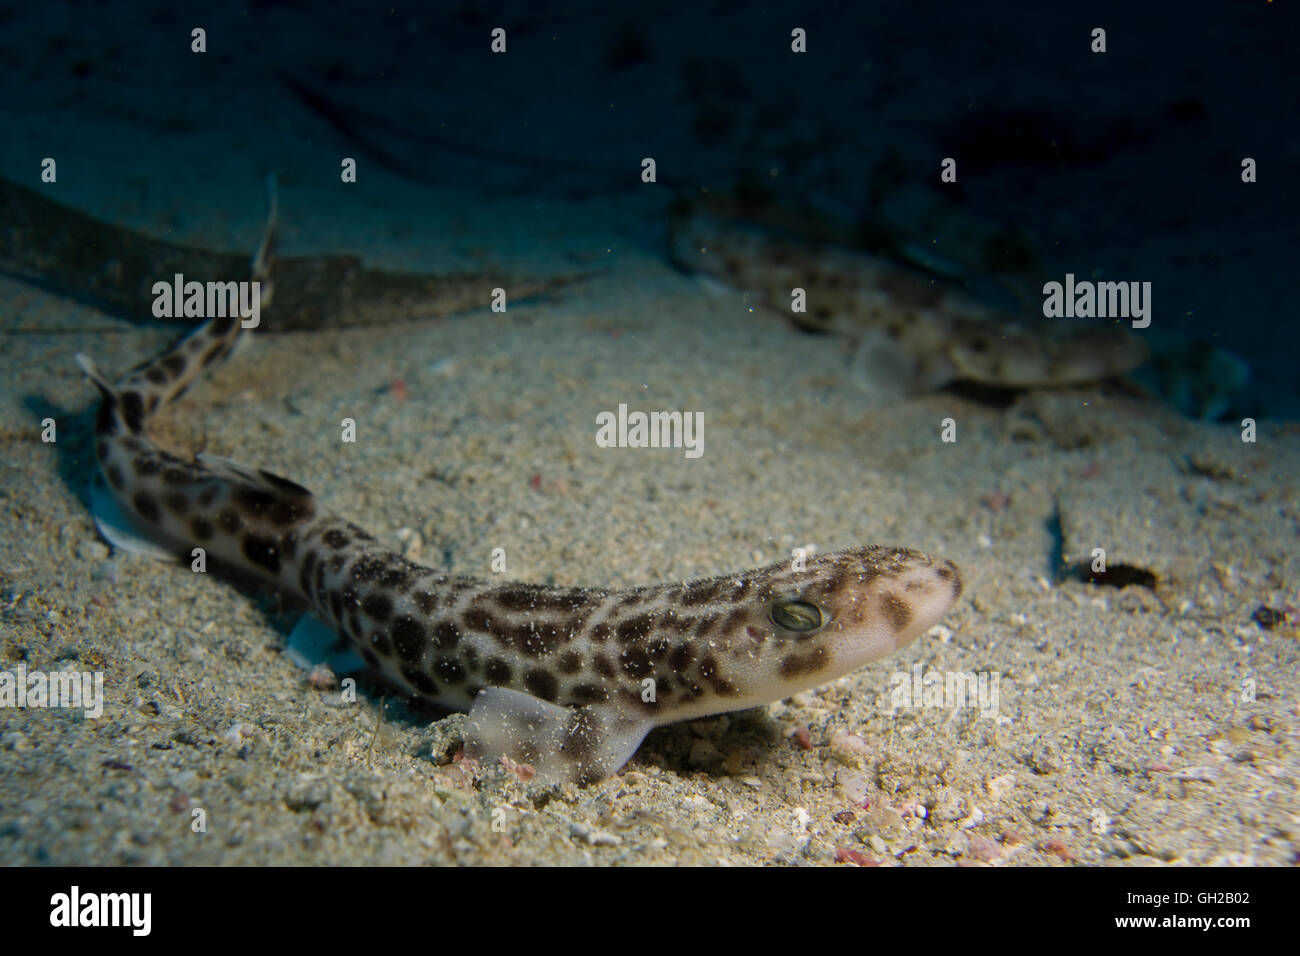 Smaller-spotted catshark, Scyliorhinus canicula, from the Mediterranean Sea. This picture was taken in Malta. Stock Photo